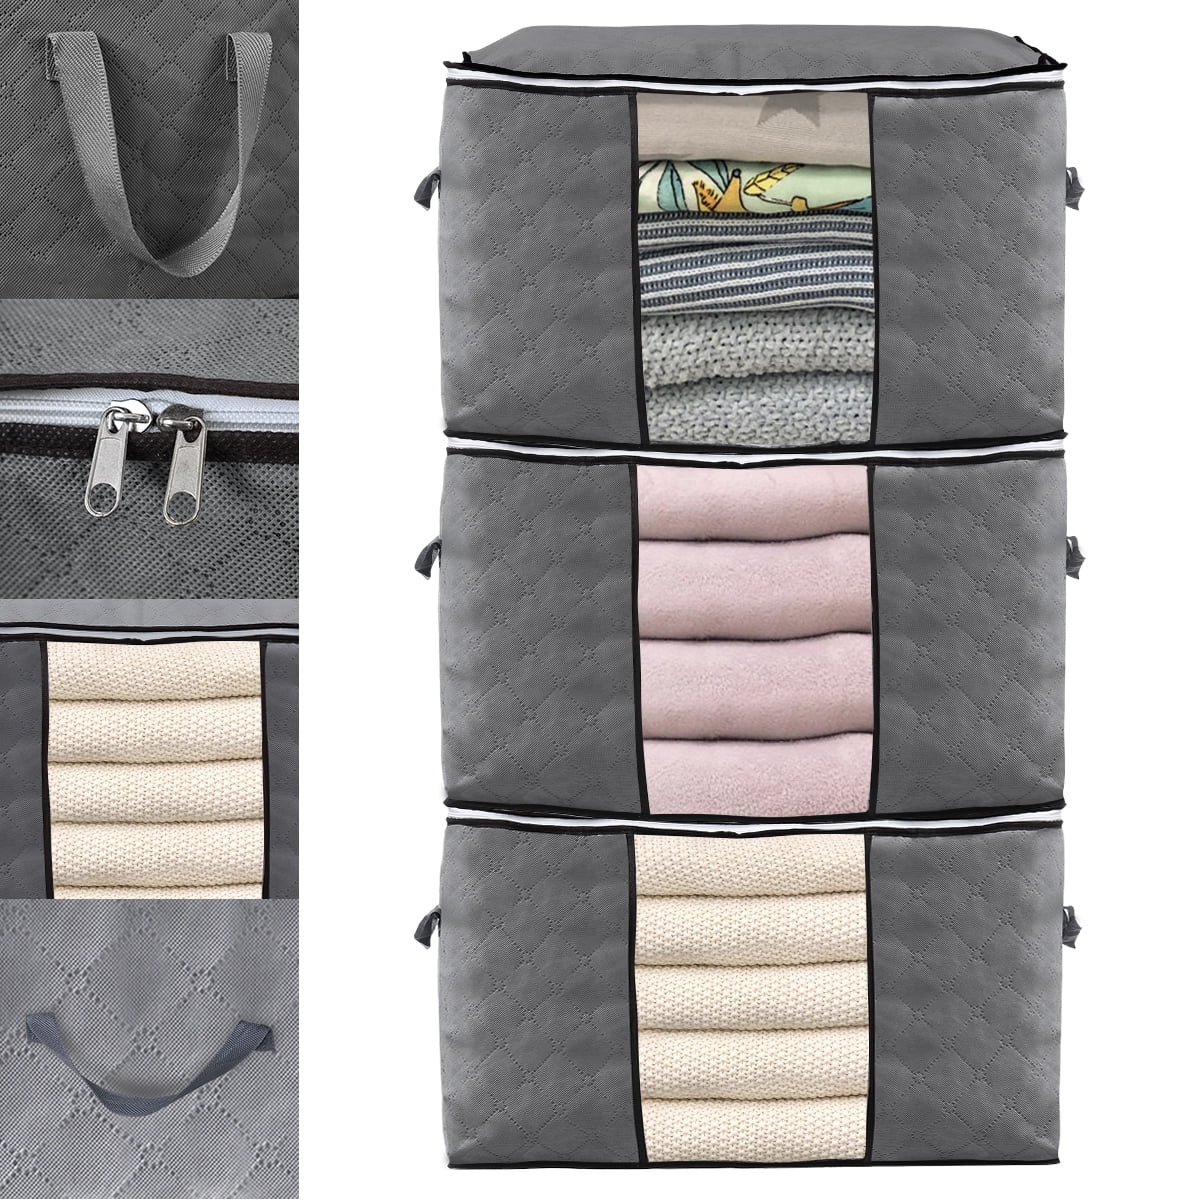 Grey1, 3 Packs DESTRIC Foldable Storage Bag Organizers Clothes Storage Boxes-Waterproof Anti-Mold Moisture Proof Clothes Storage with Clear Window Carry Handles for Blanket Comforter Bedding 